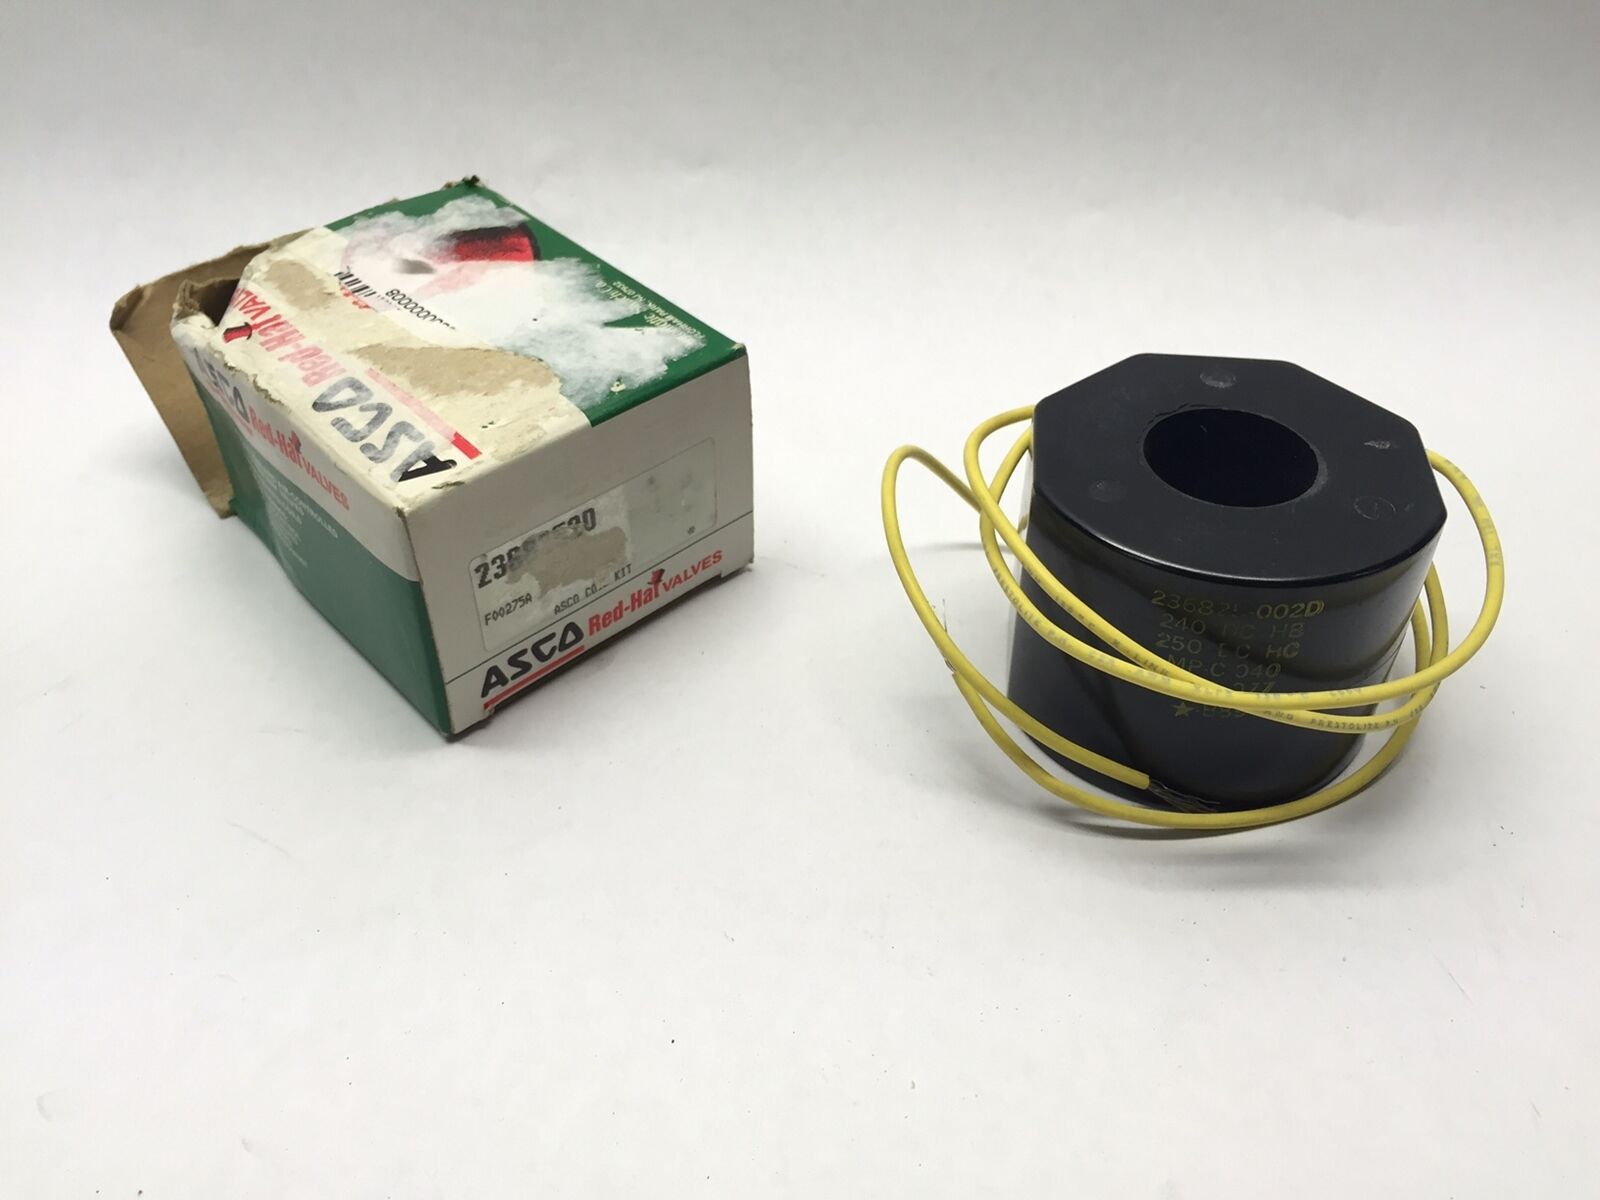 Asco 236825-002D Replacement Coil for Solenoid Valve 2368252D F00275A, NEW